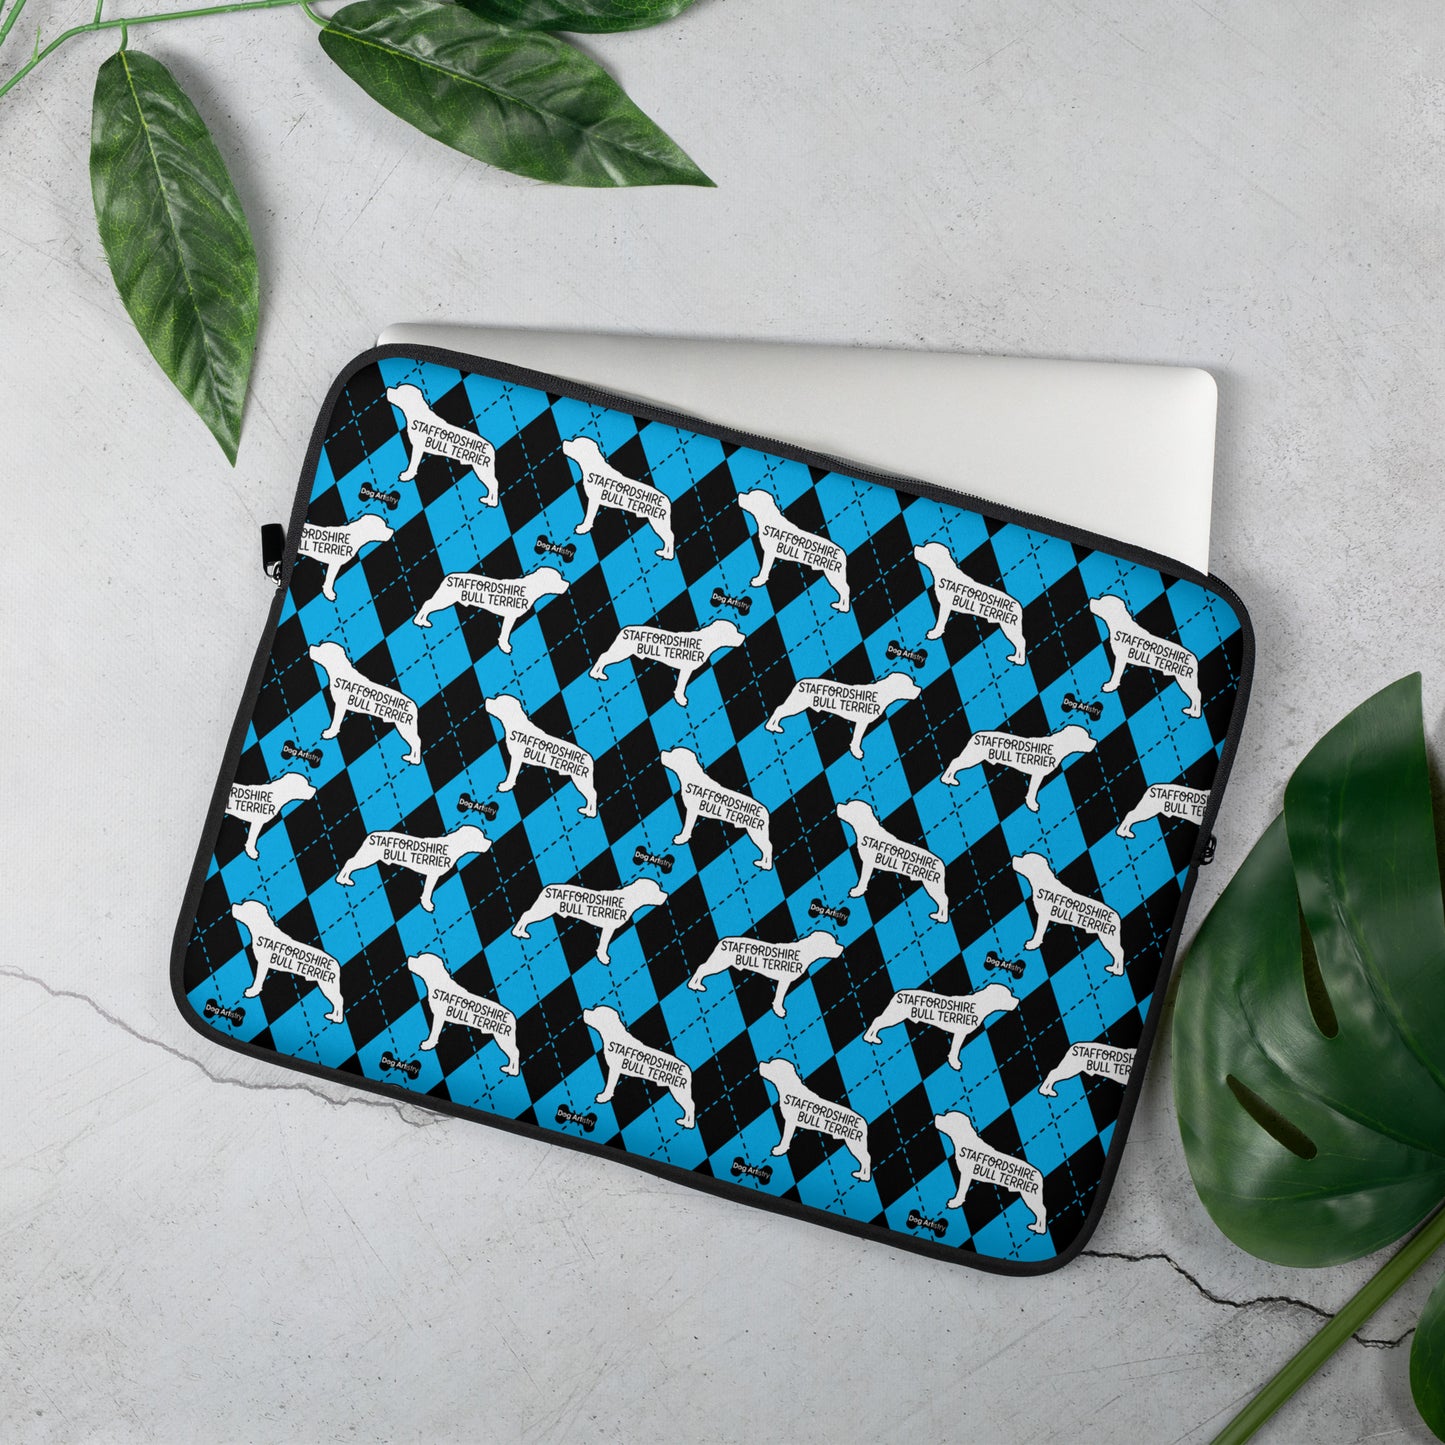 Staffordshire Bull Terrier blue and black argyle laptop sleeve by Dog Artistry